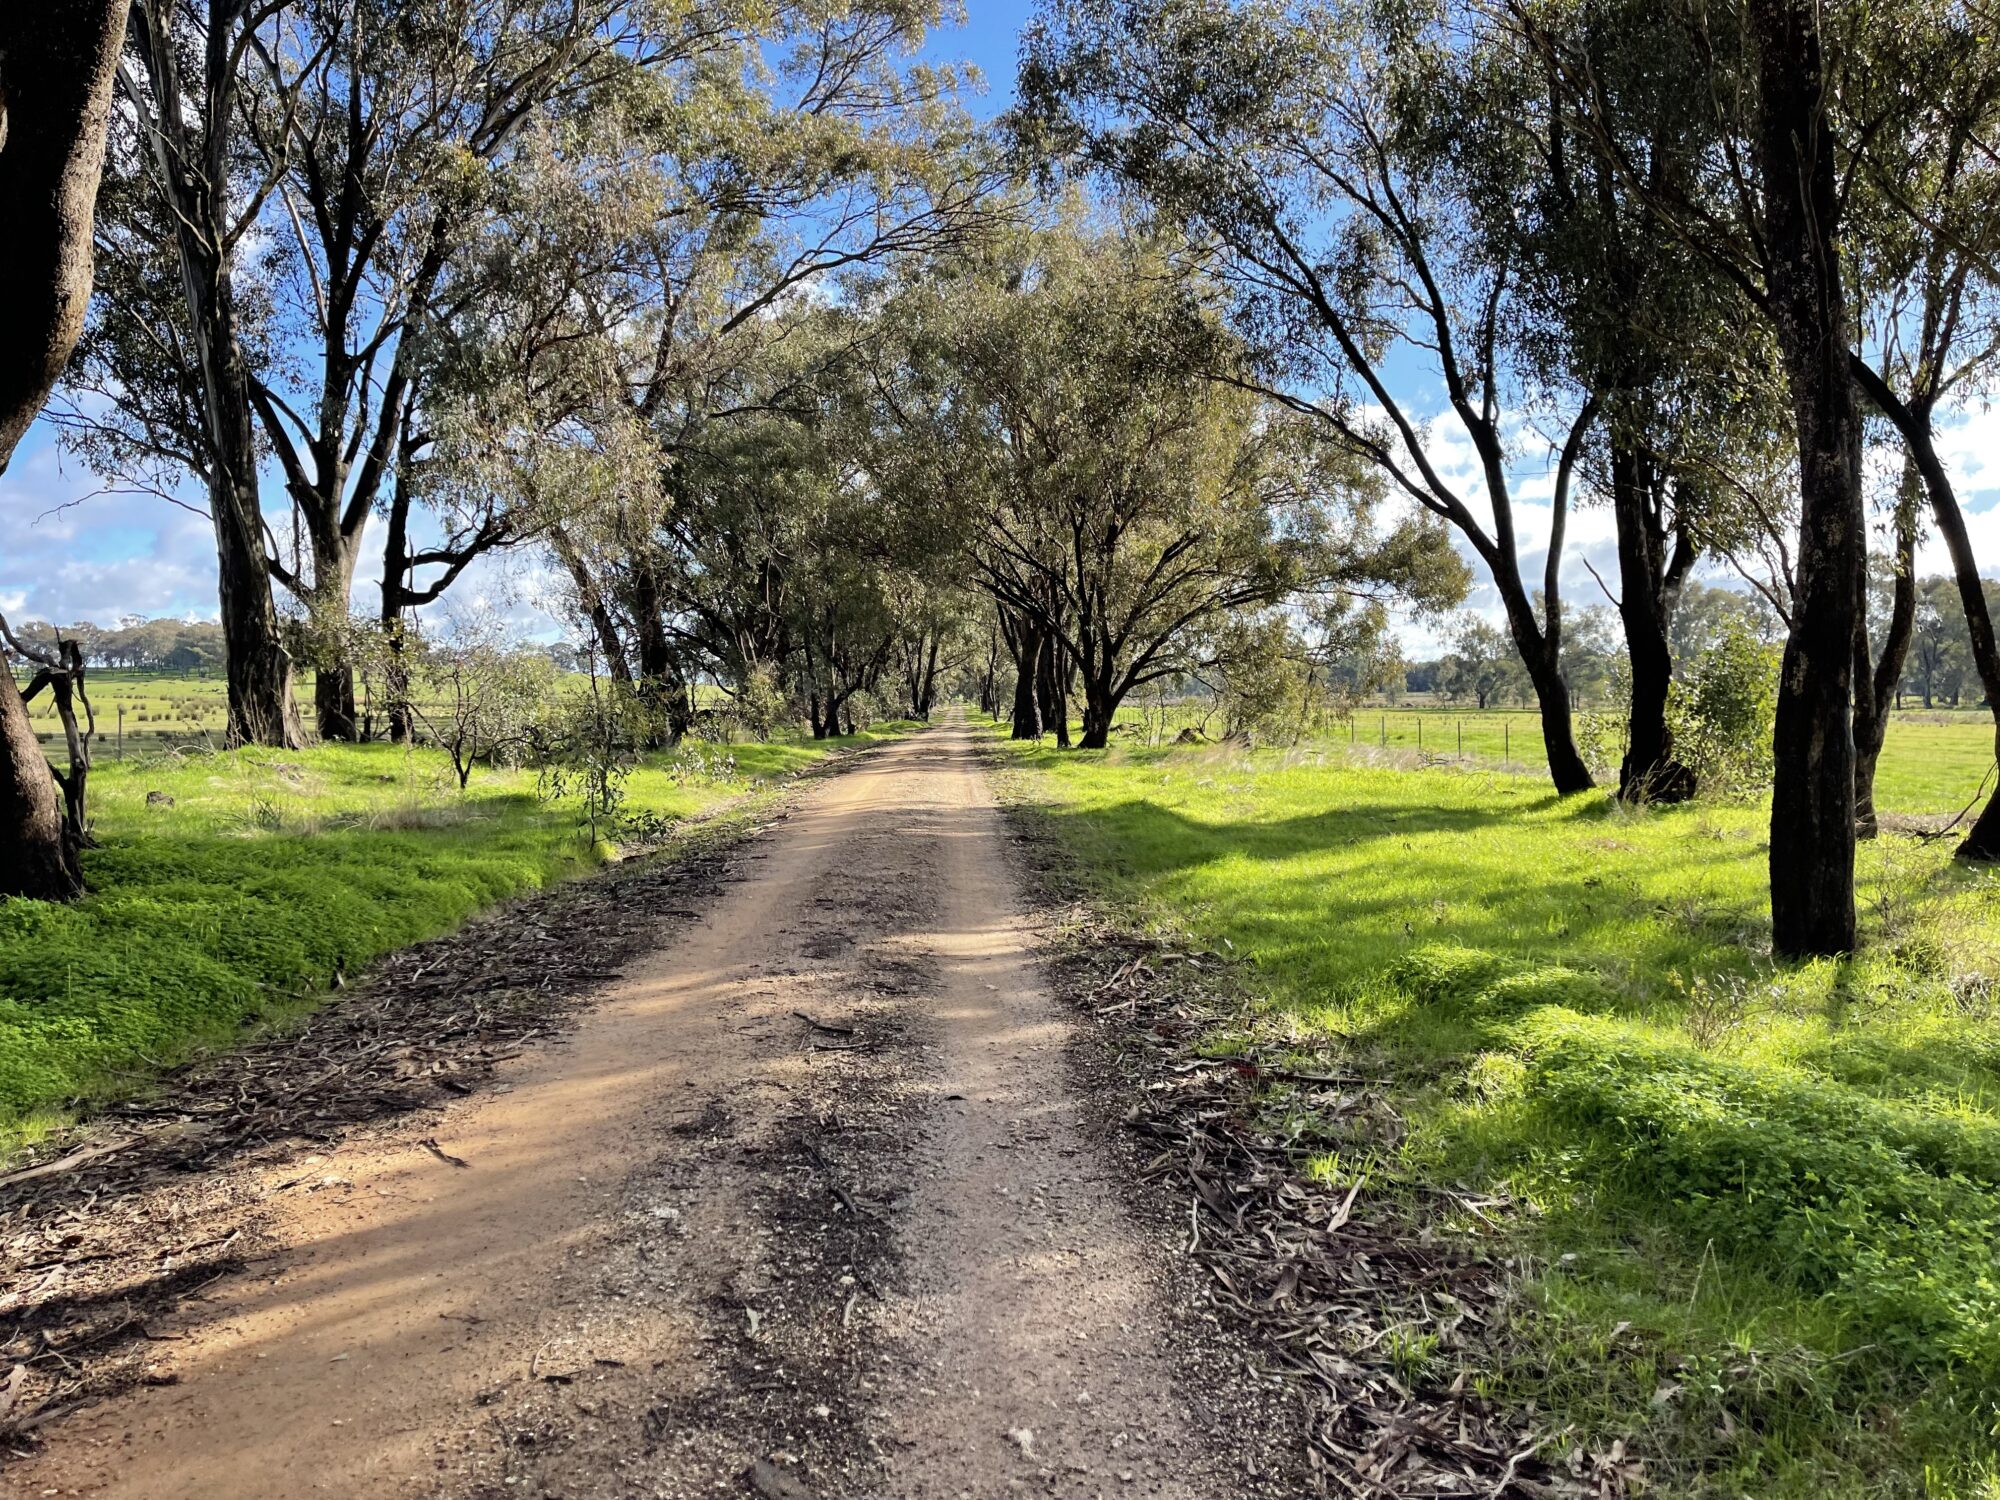 A smooth native tree lined gravel road surrounded by open farmland